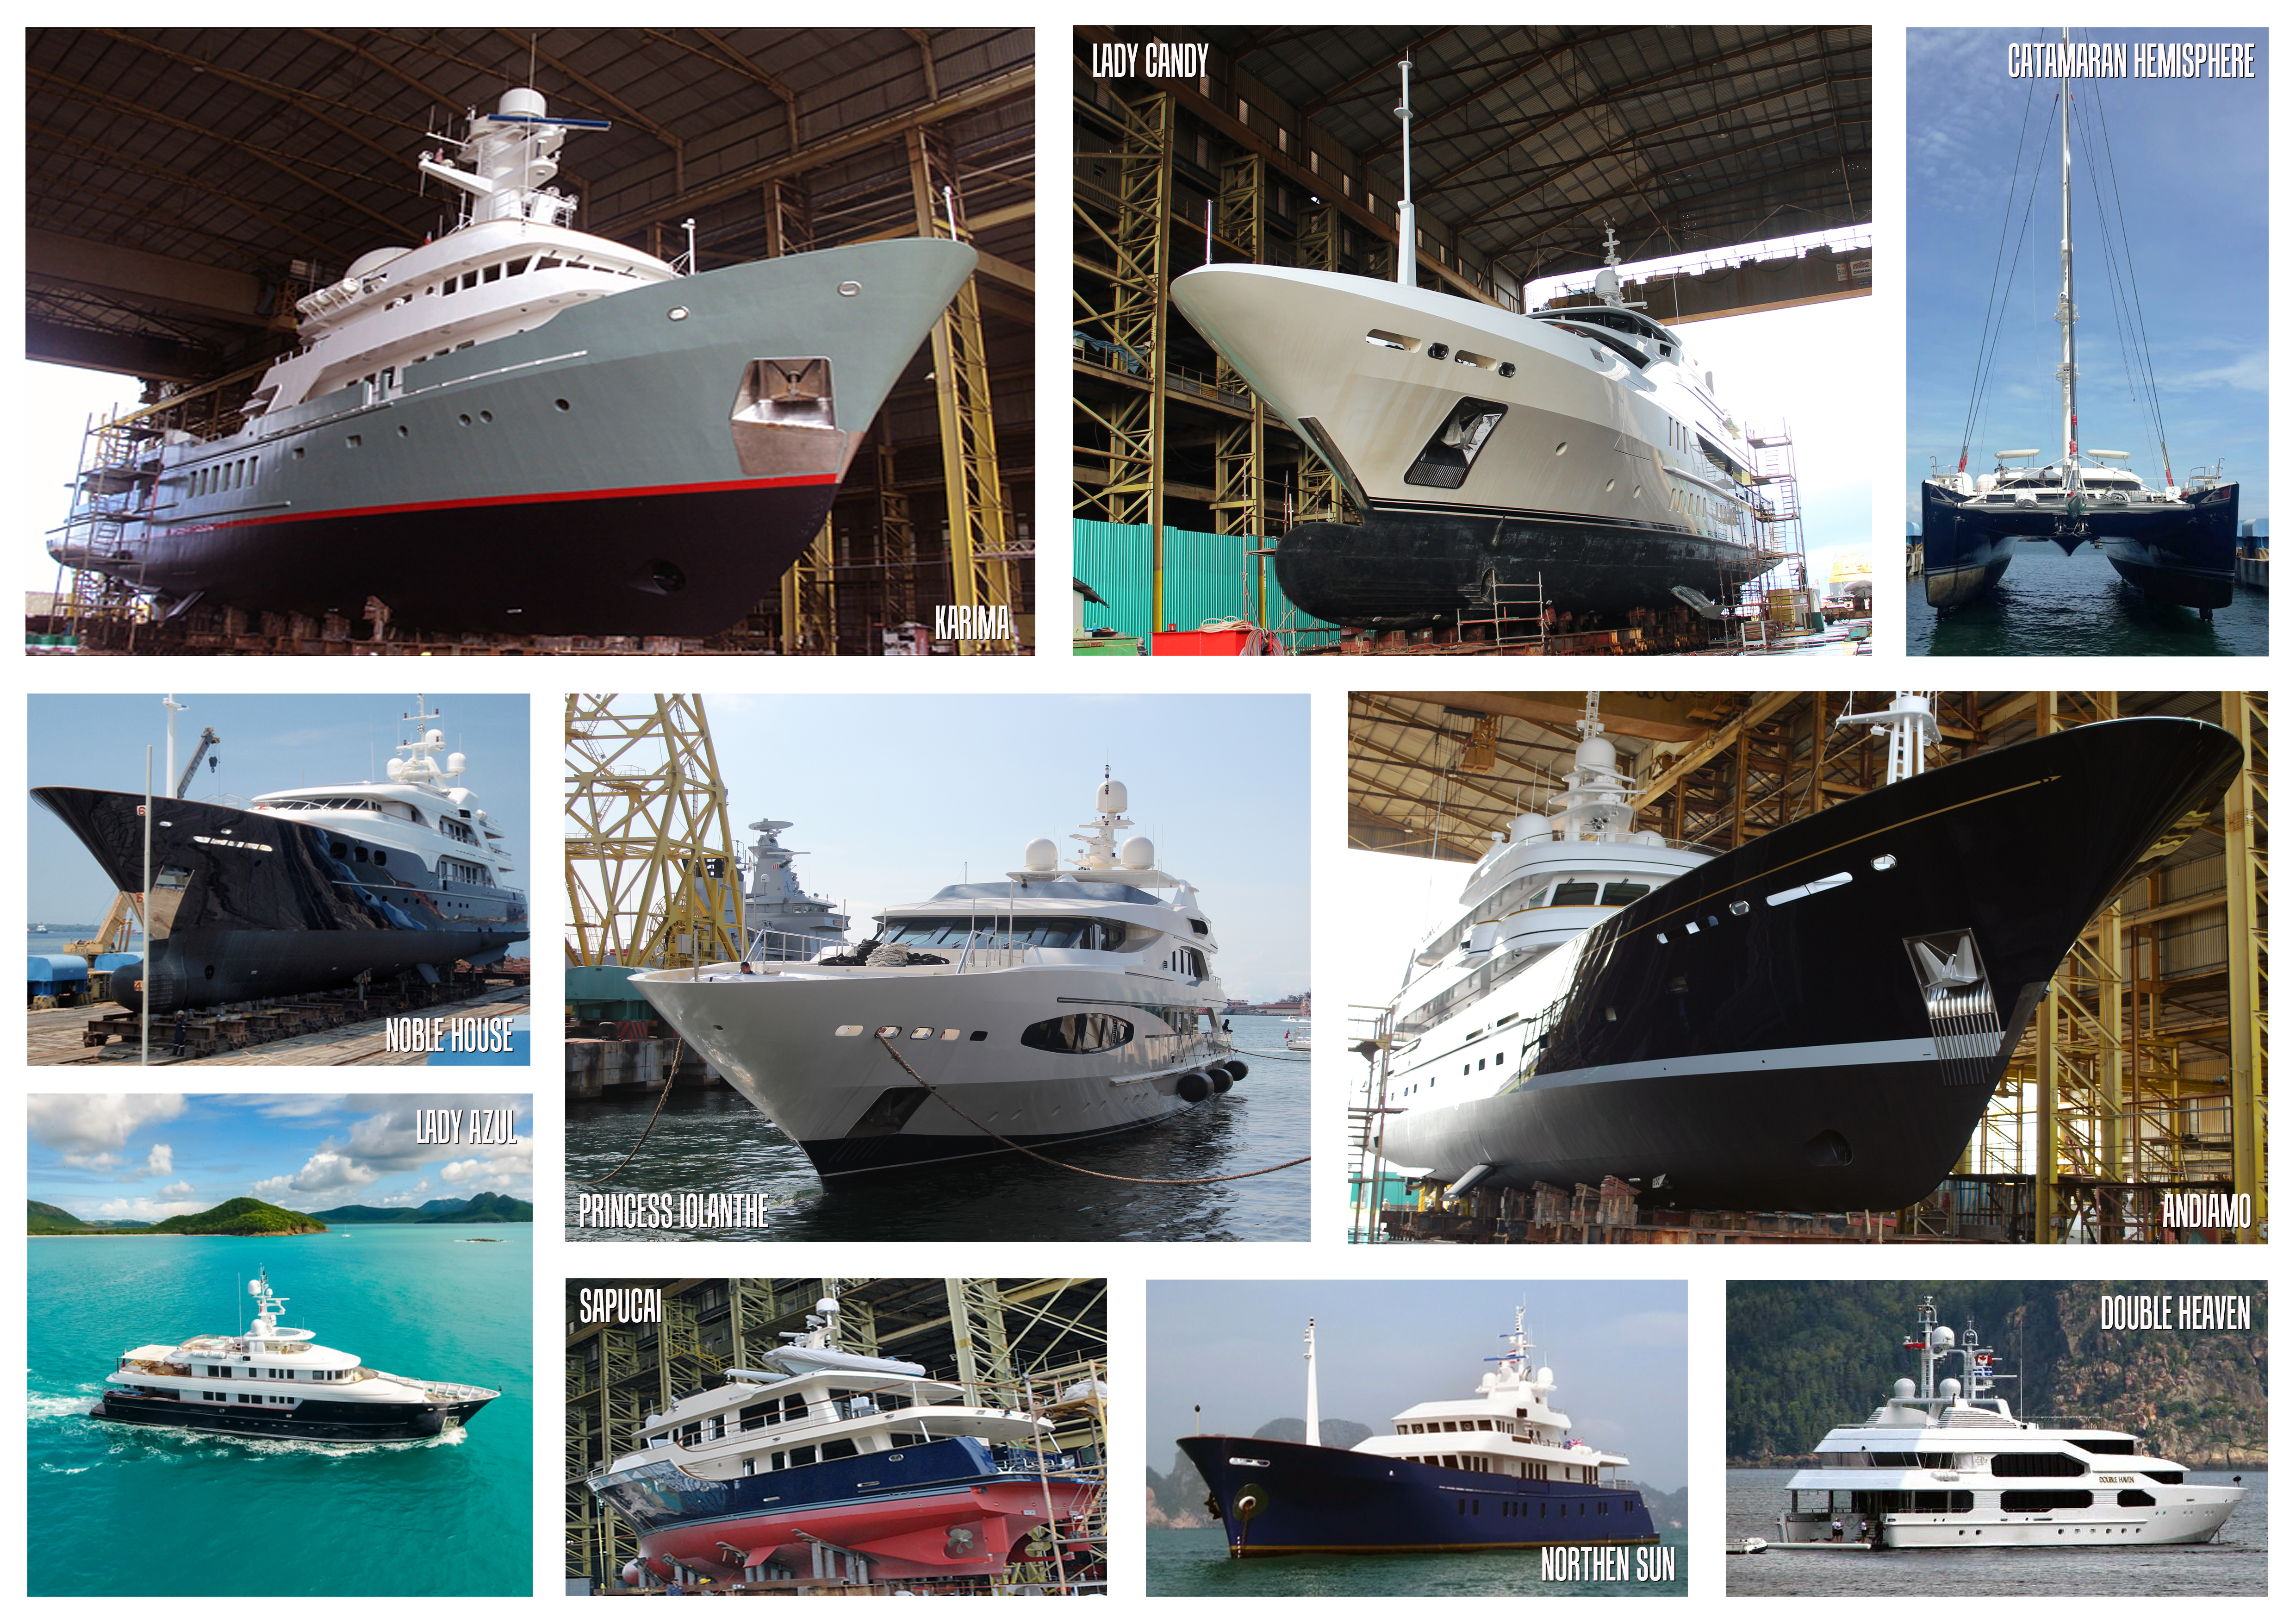 LSE performs Maintenance and Servicing of Yachts & Commercial Vessels